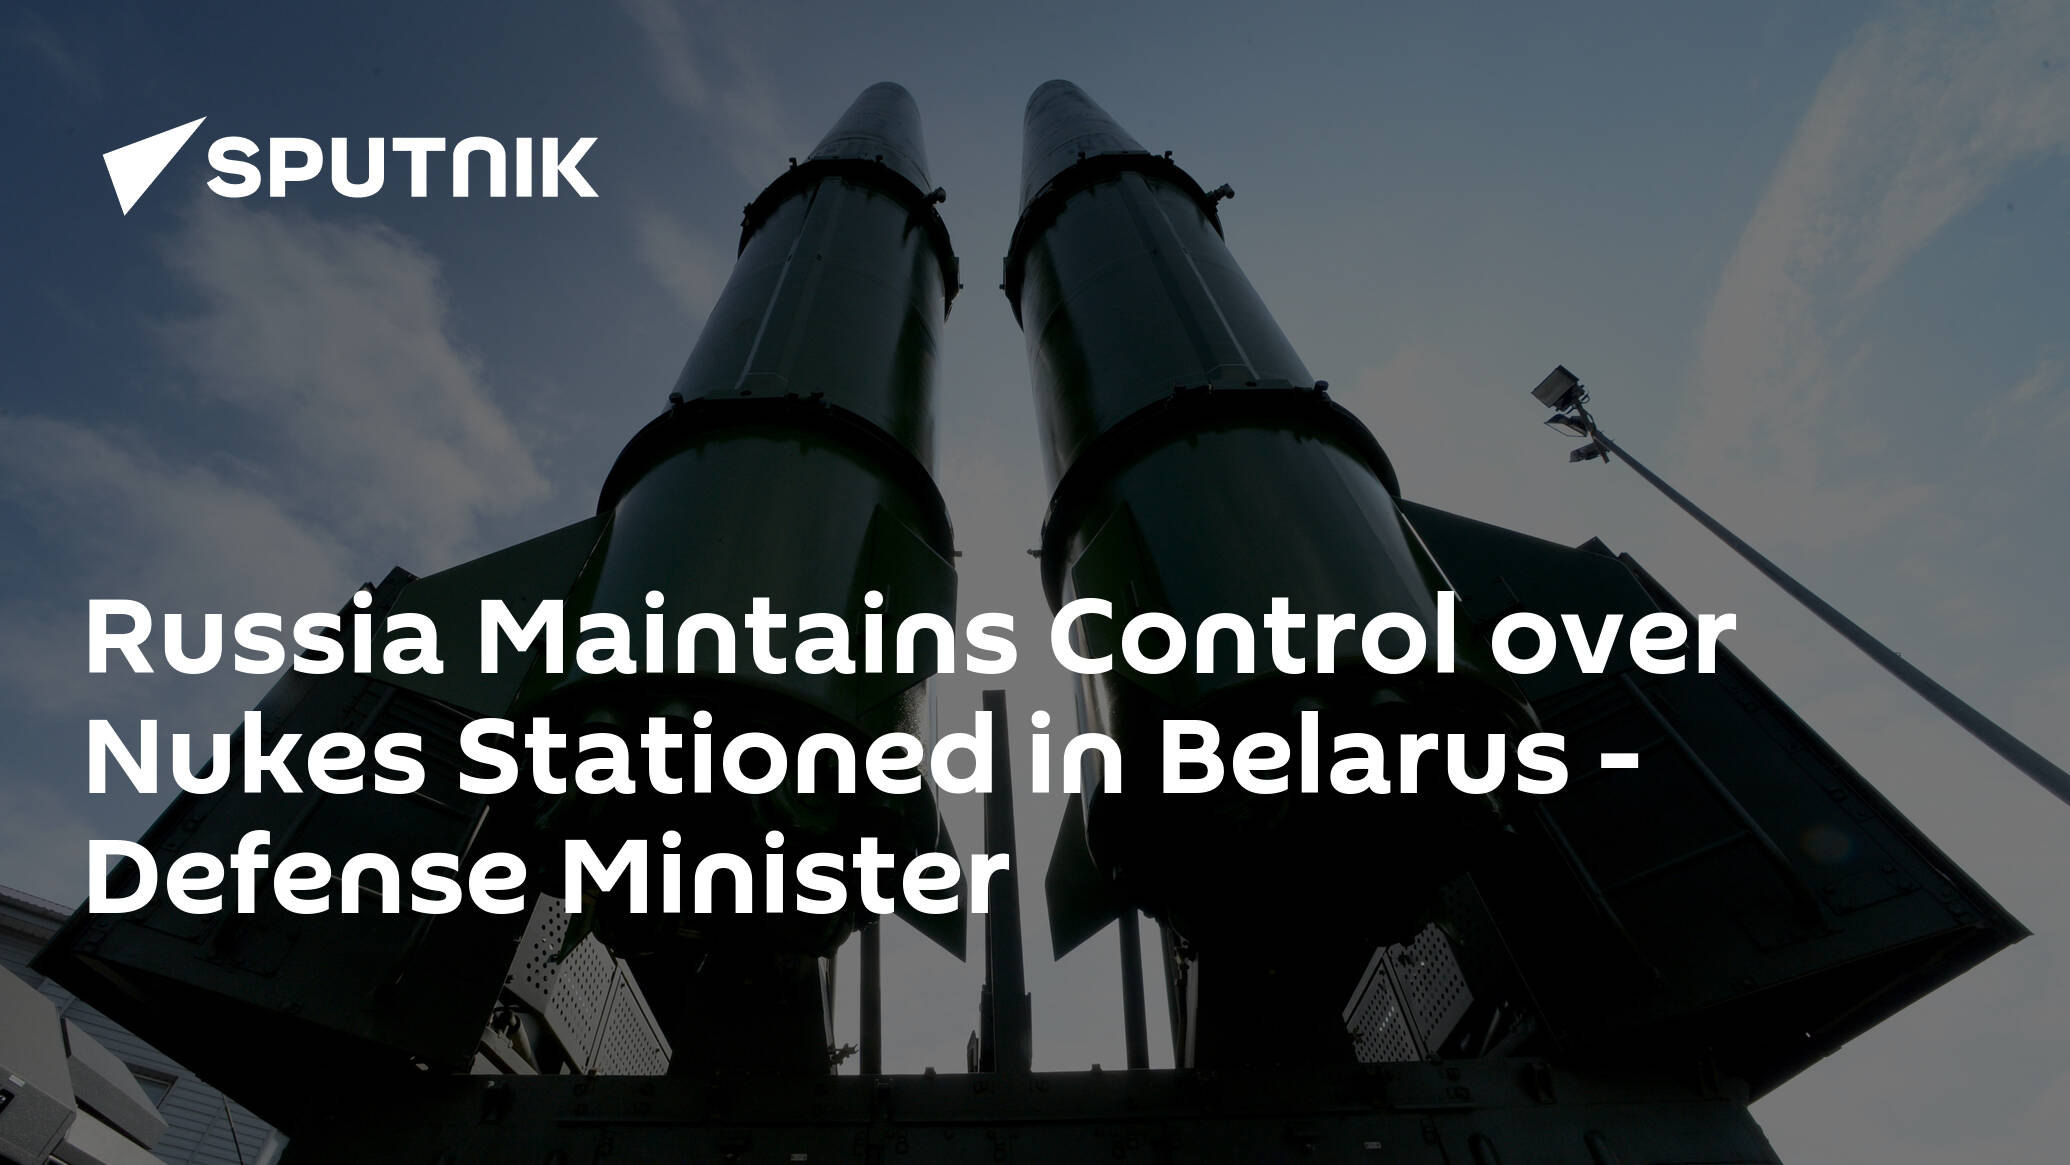 Decision to Deploy Nukes in Belarus Made Amid Tensions